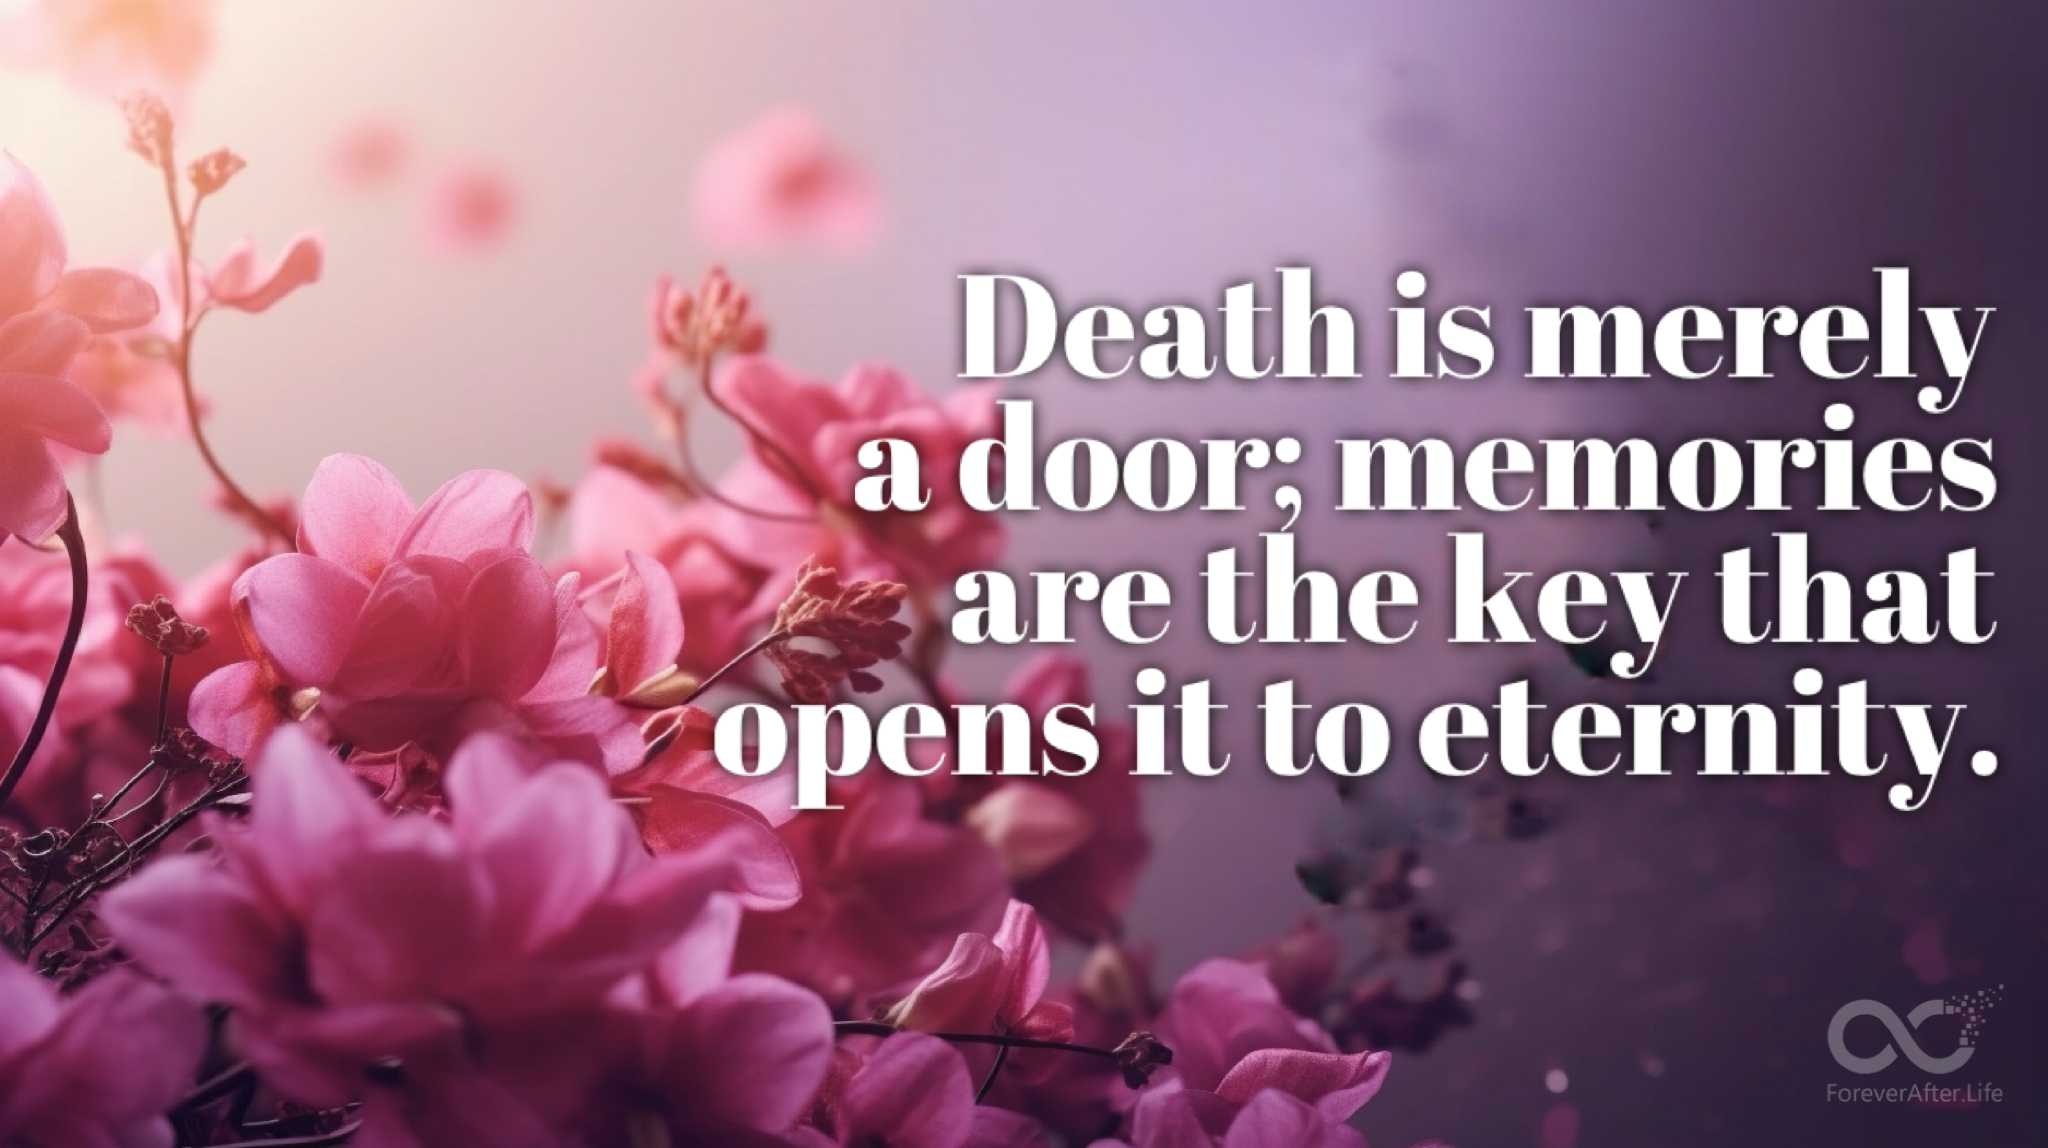 Death is merely a door; memories are the key that opens it to eternity.